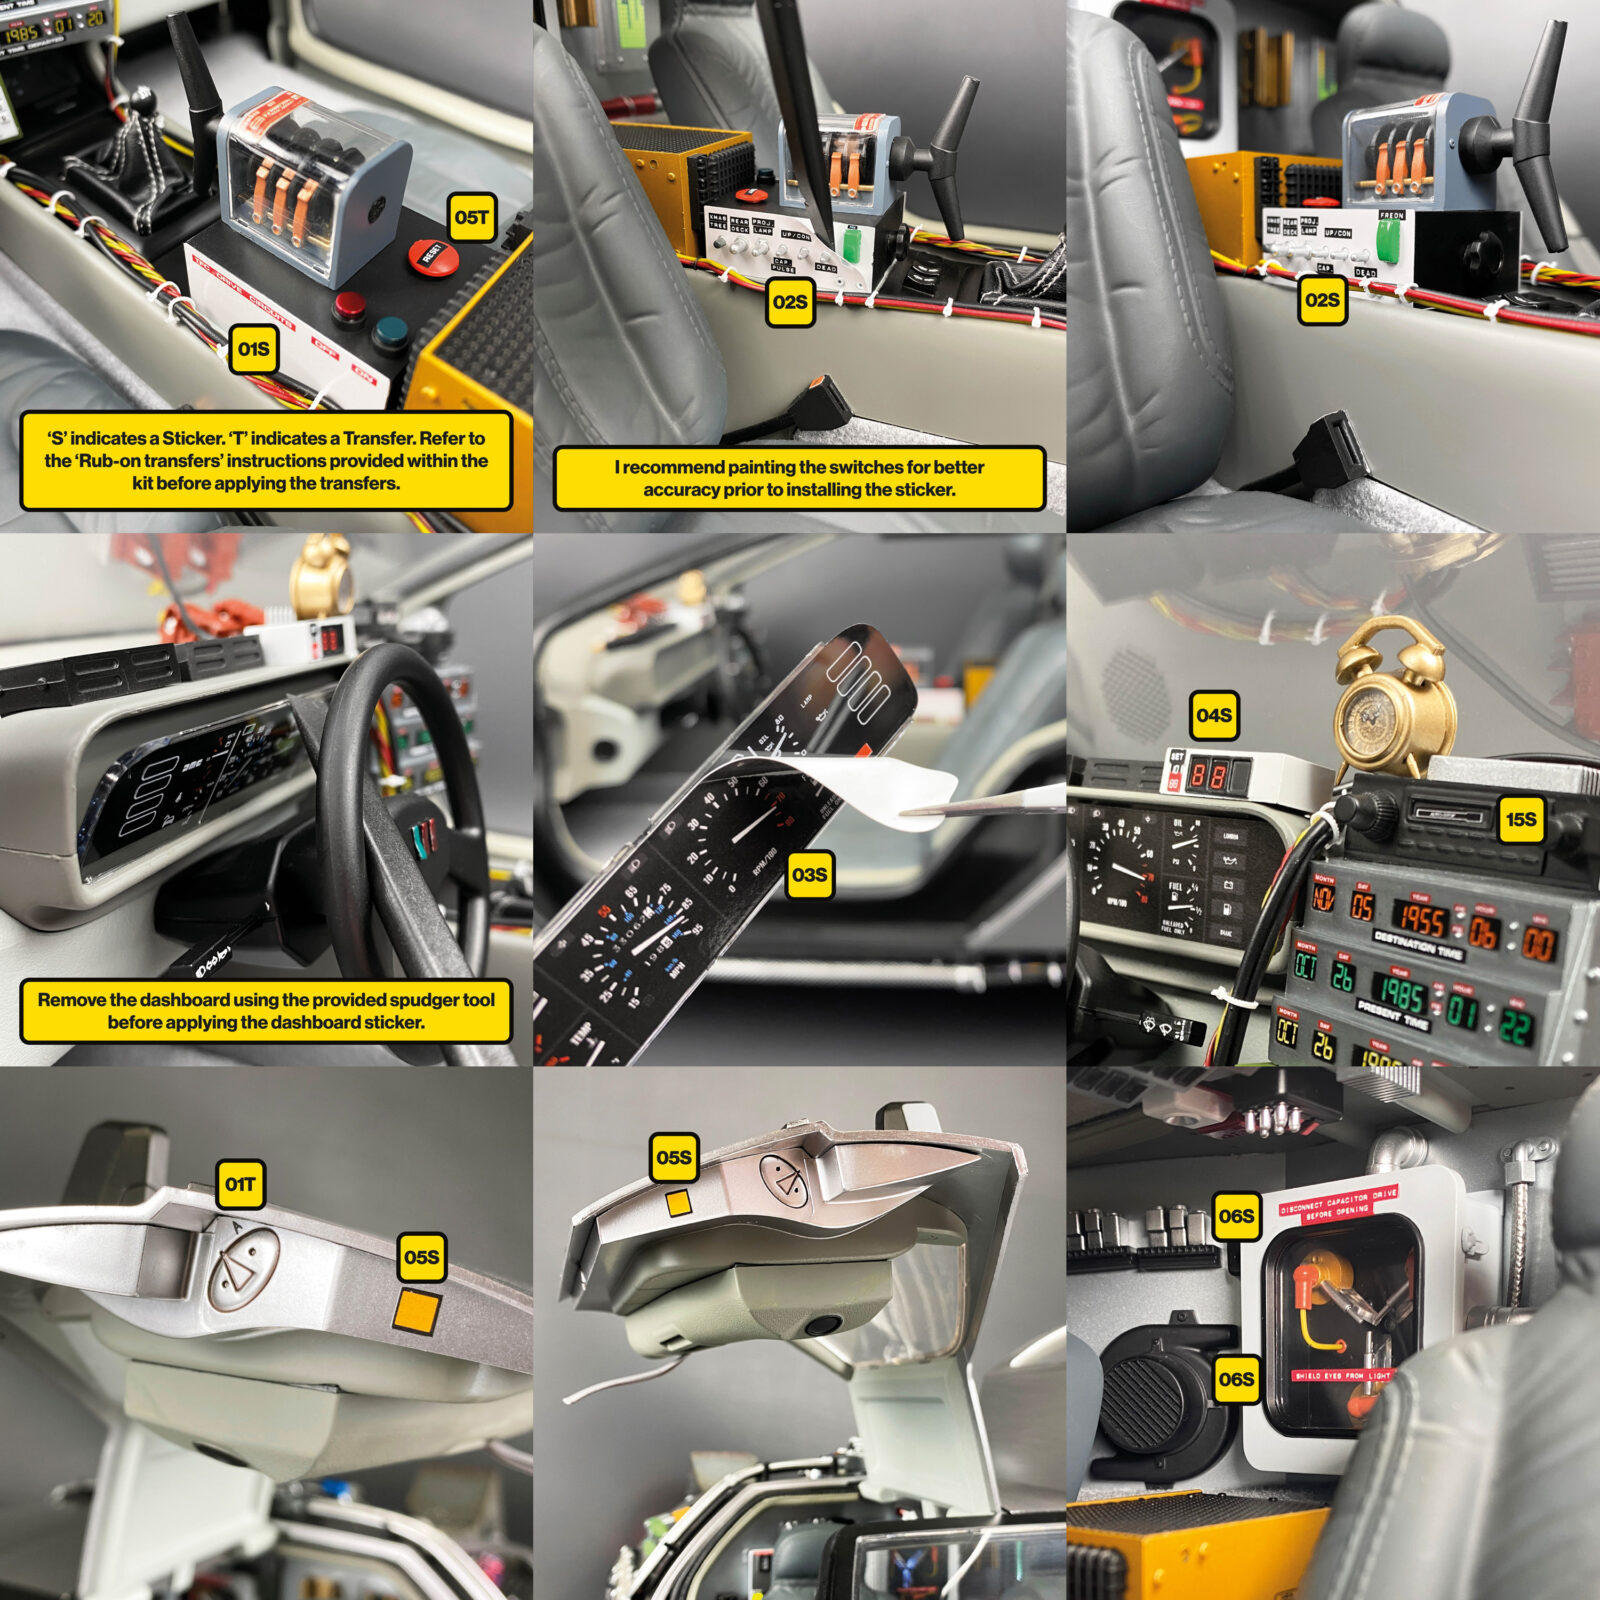 Hot Toys DeLorean Stickers and Transfers for dashboard, switches and more